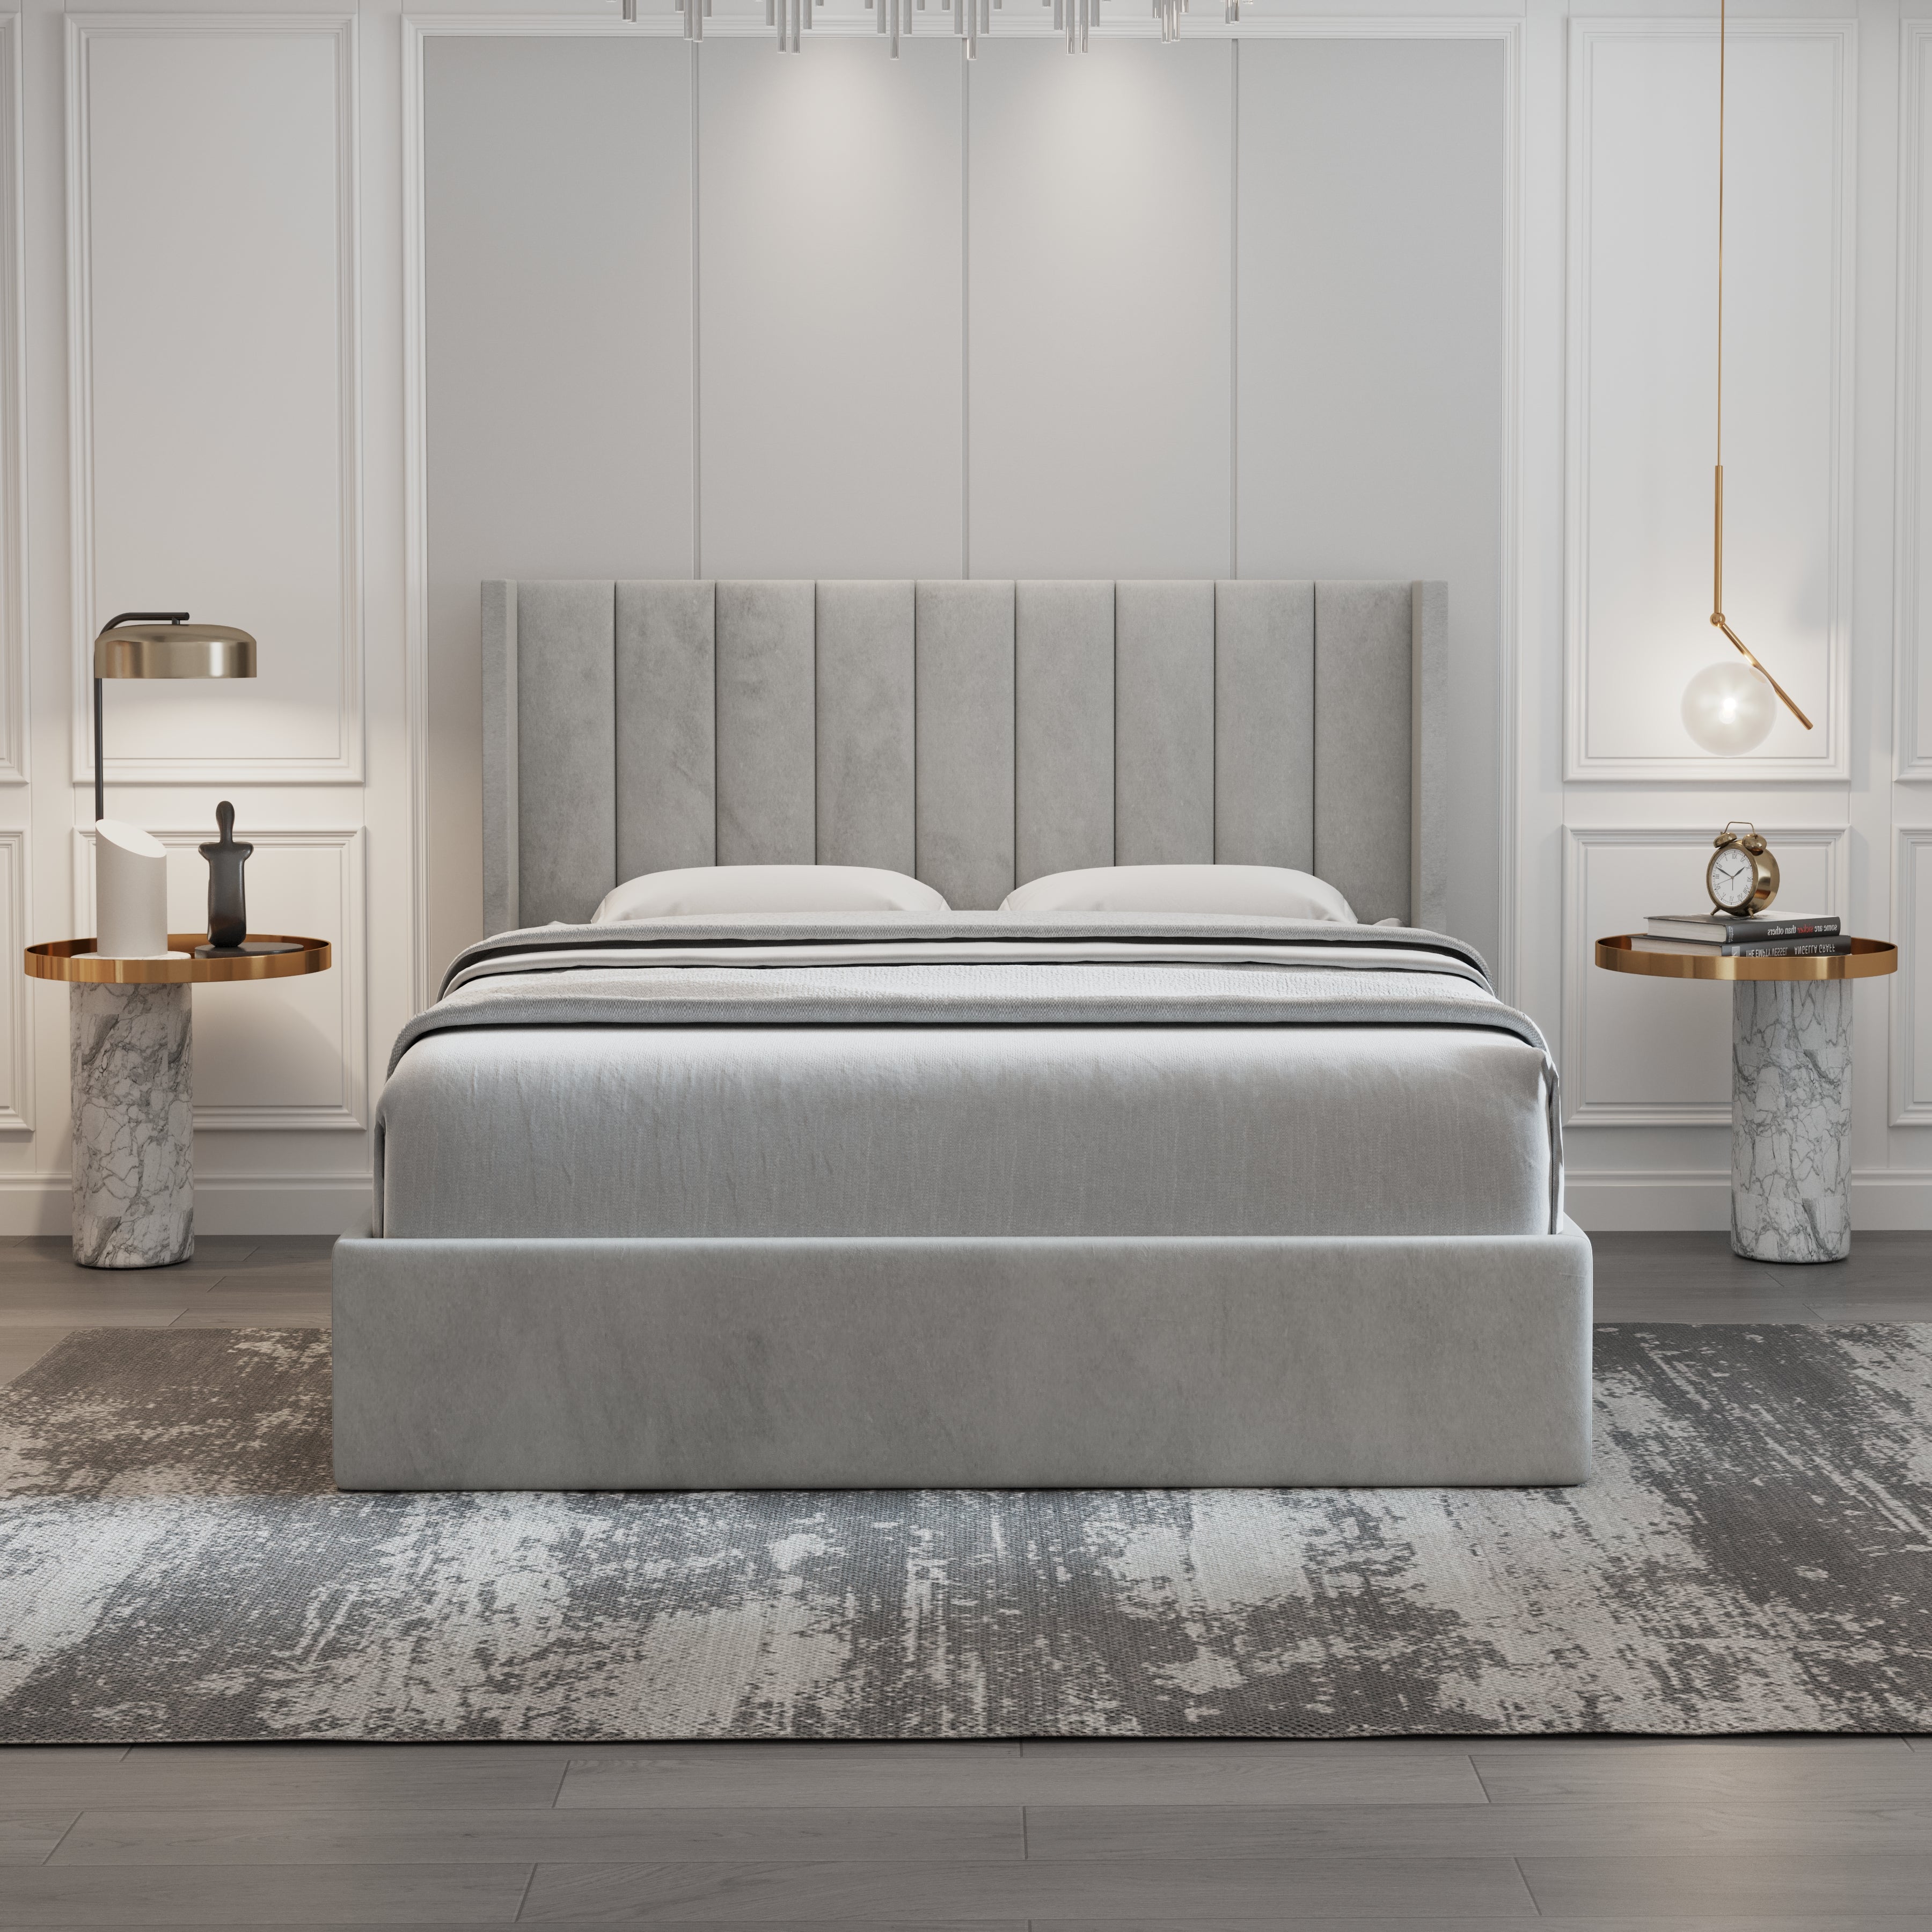 Velets Oliver Contemporary Mid-Century Soft Padded Upholstered Platform Storage Bed with Hydraulic Gas Lift Storage - Solid Wood Frame, Wood Slat System & Smart Hydraulic Under-Bed Storage - Light Gray